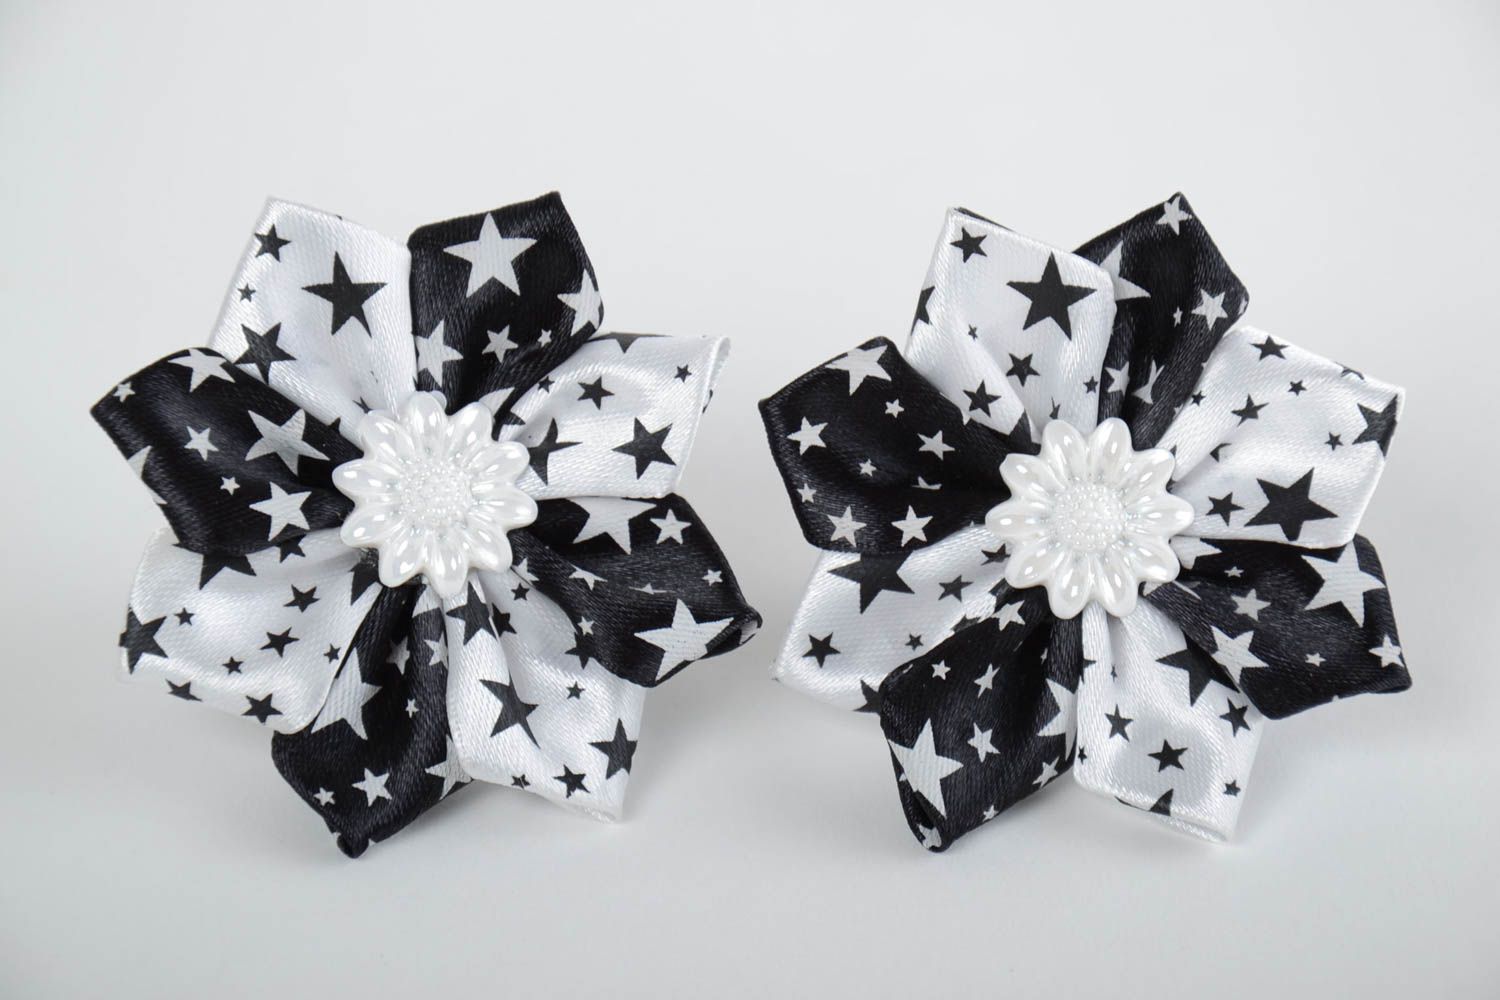 Handmade black and white hair ties with flowers made of satin ribbons 2 pieces photo 4